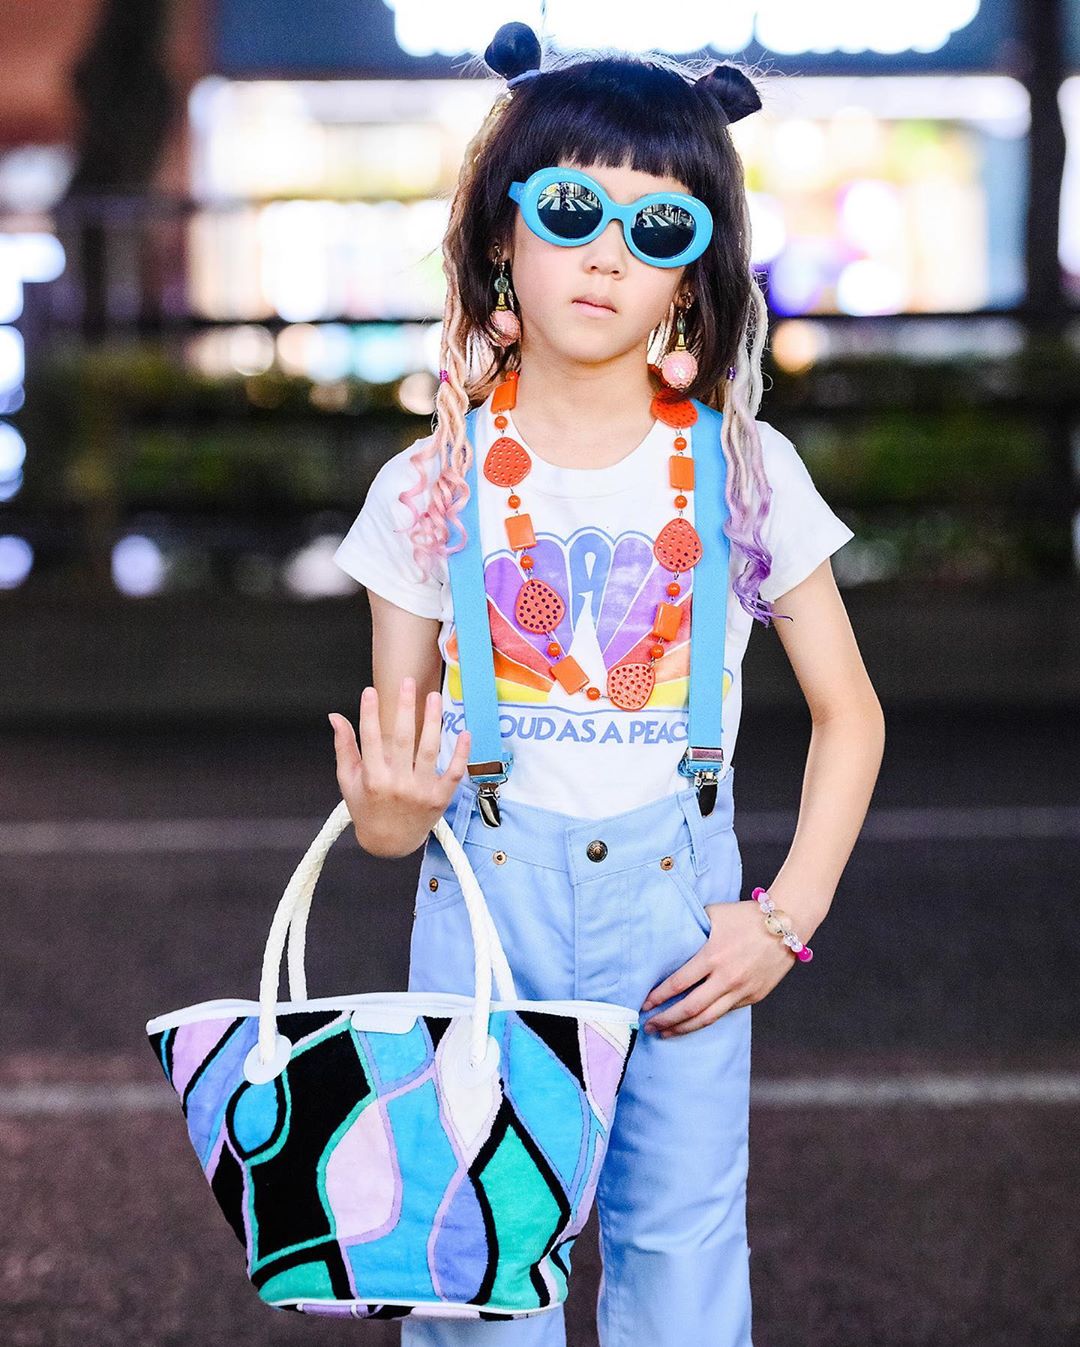 Tokyo Fashion: Lino (@lino_queenofvintage) is a 7-year-old Japanese ...